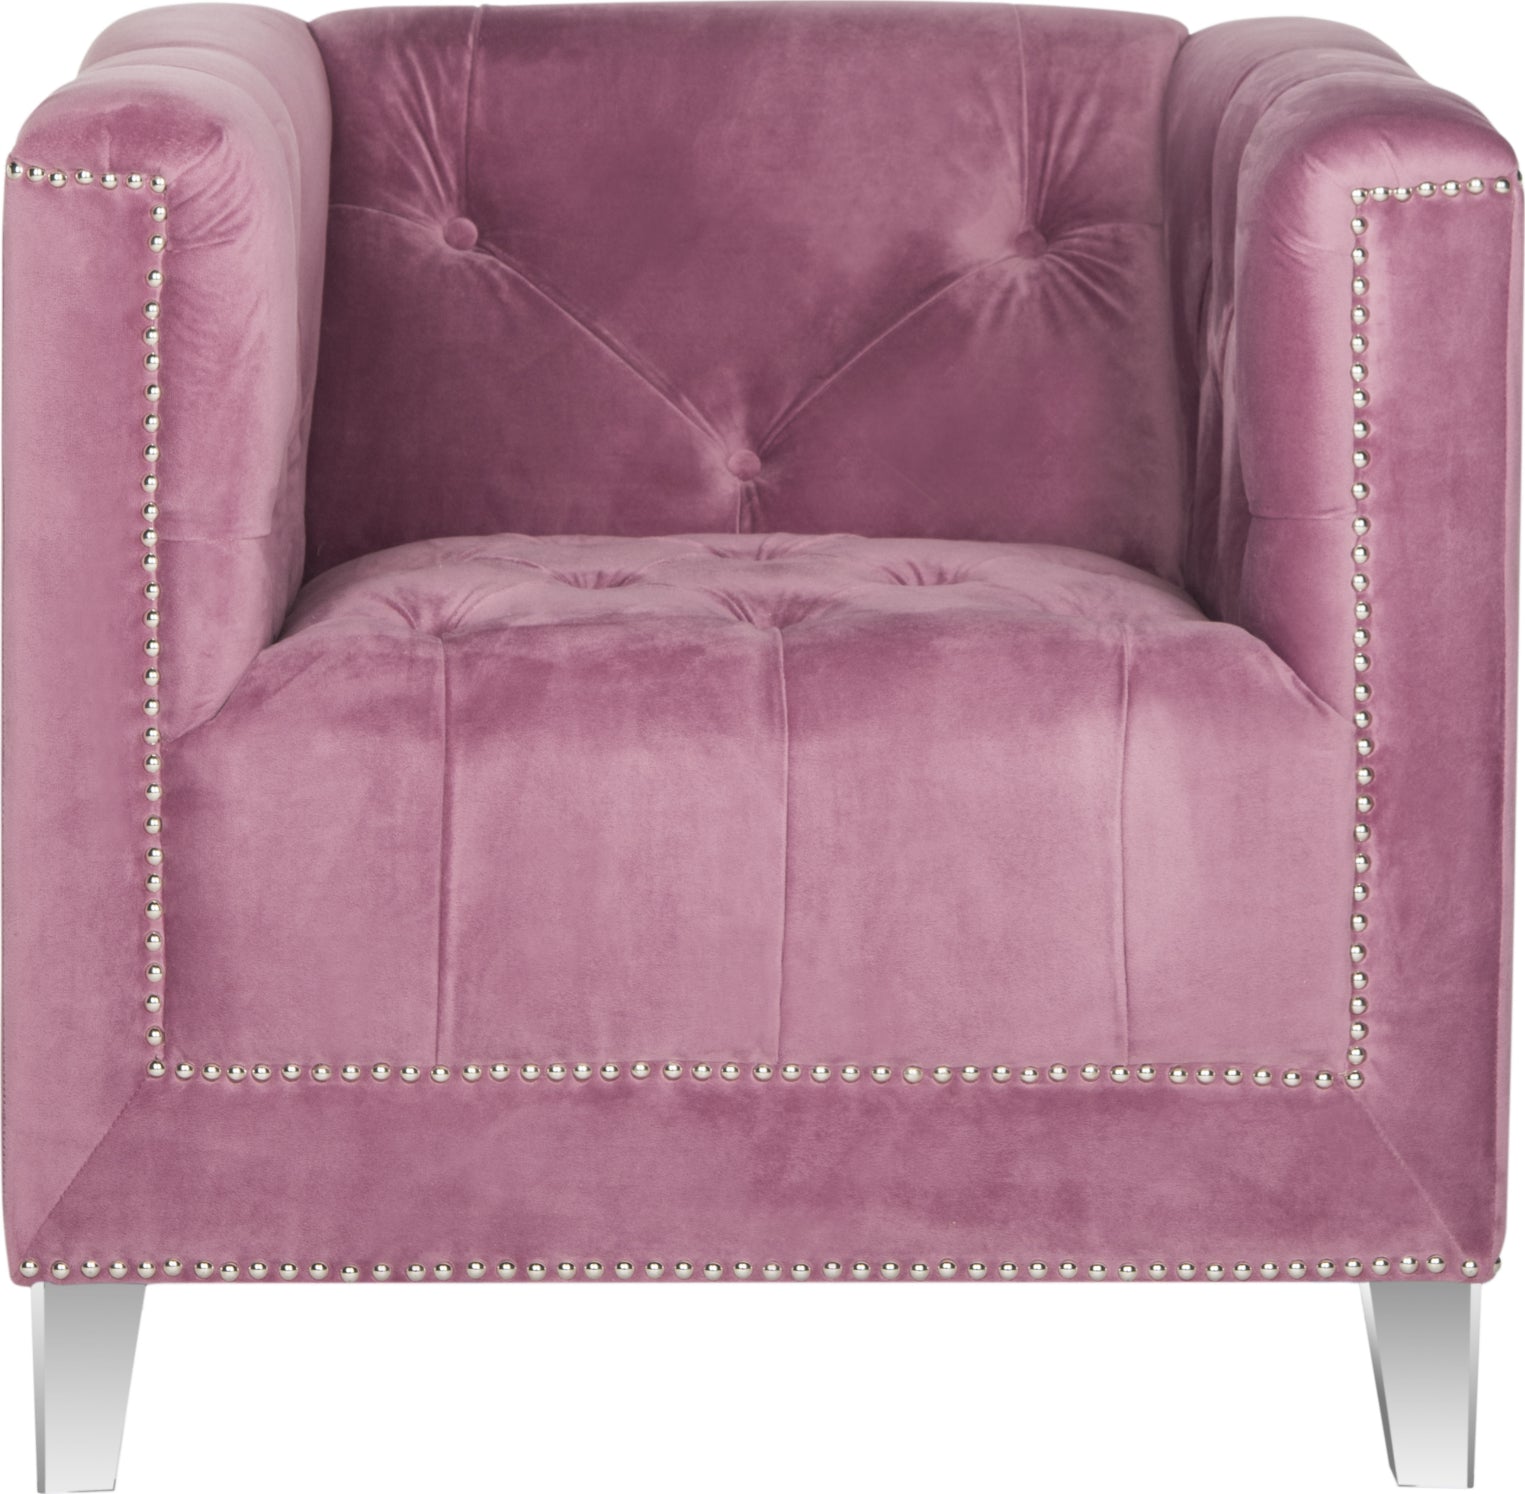 Safavieh Hollywood Glam Tufted Acrylic Plum Club Chair With Silver Nail Heads and Clear Furniture main image